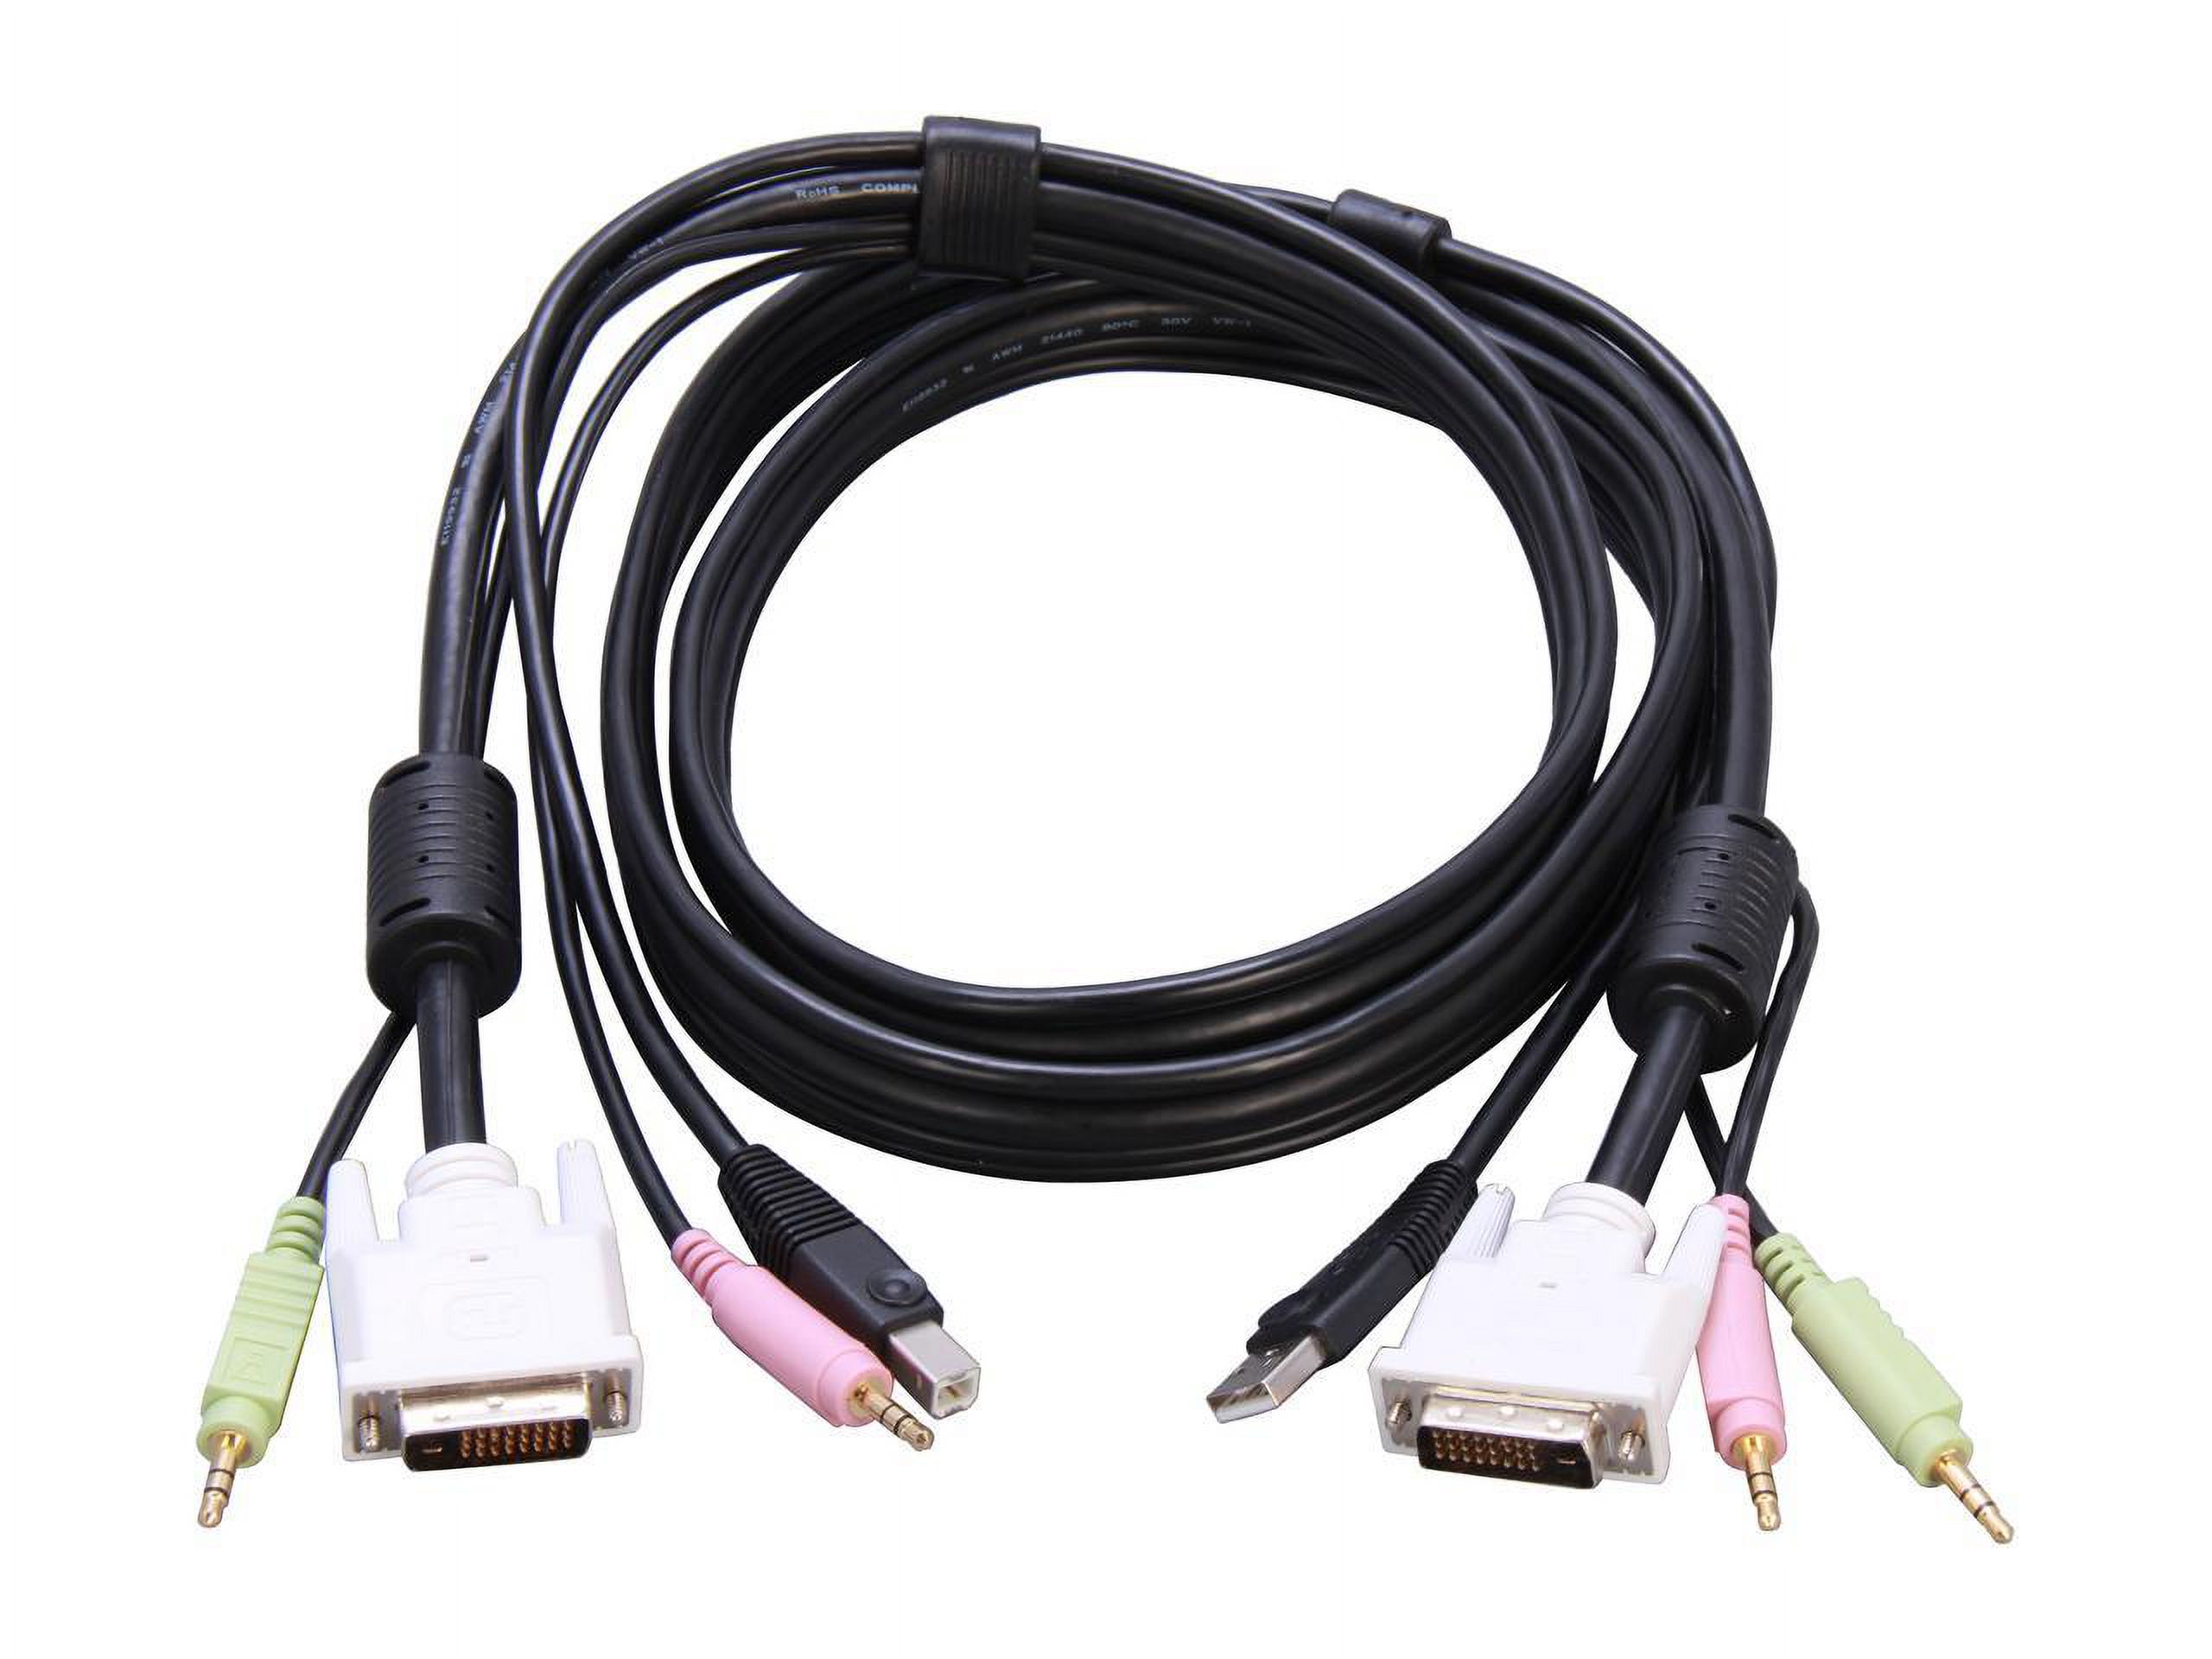 StarTech 4-in-1 USB Dual Link DVI-D KVM Switch Cable with Audio and Microphone, 6', Black - image 2 of 3